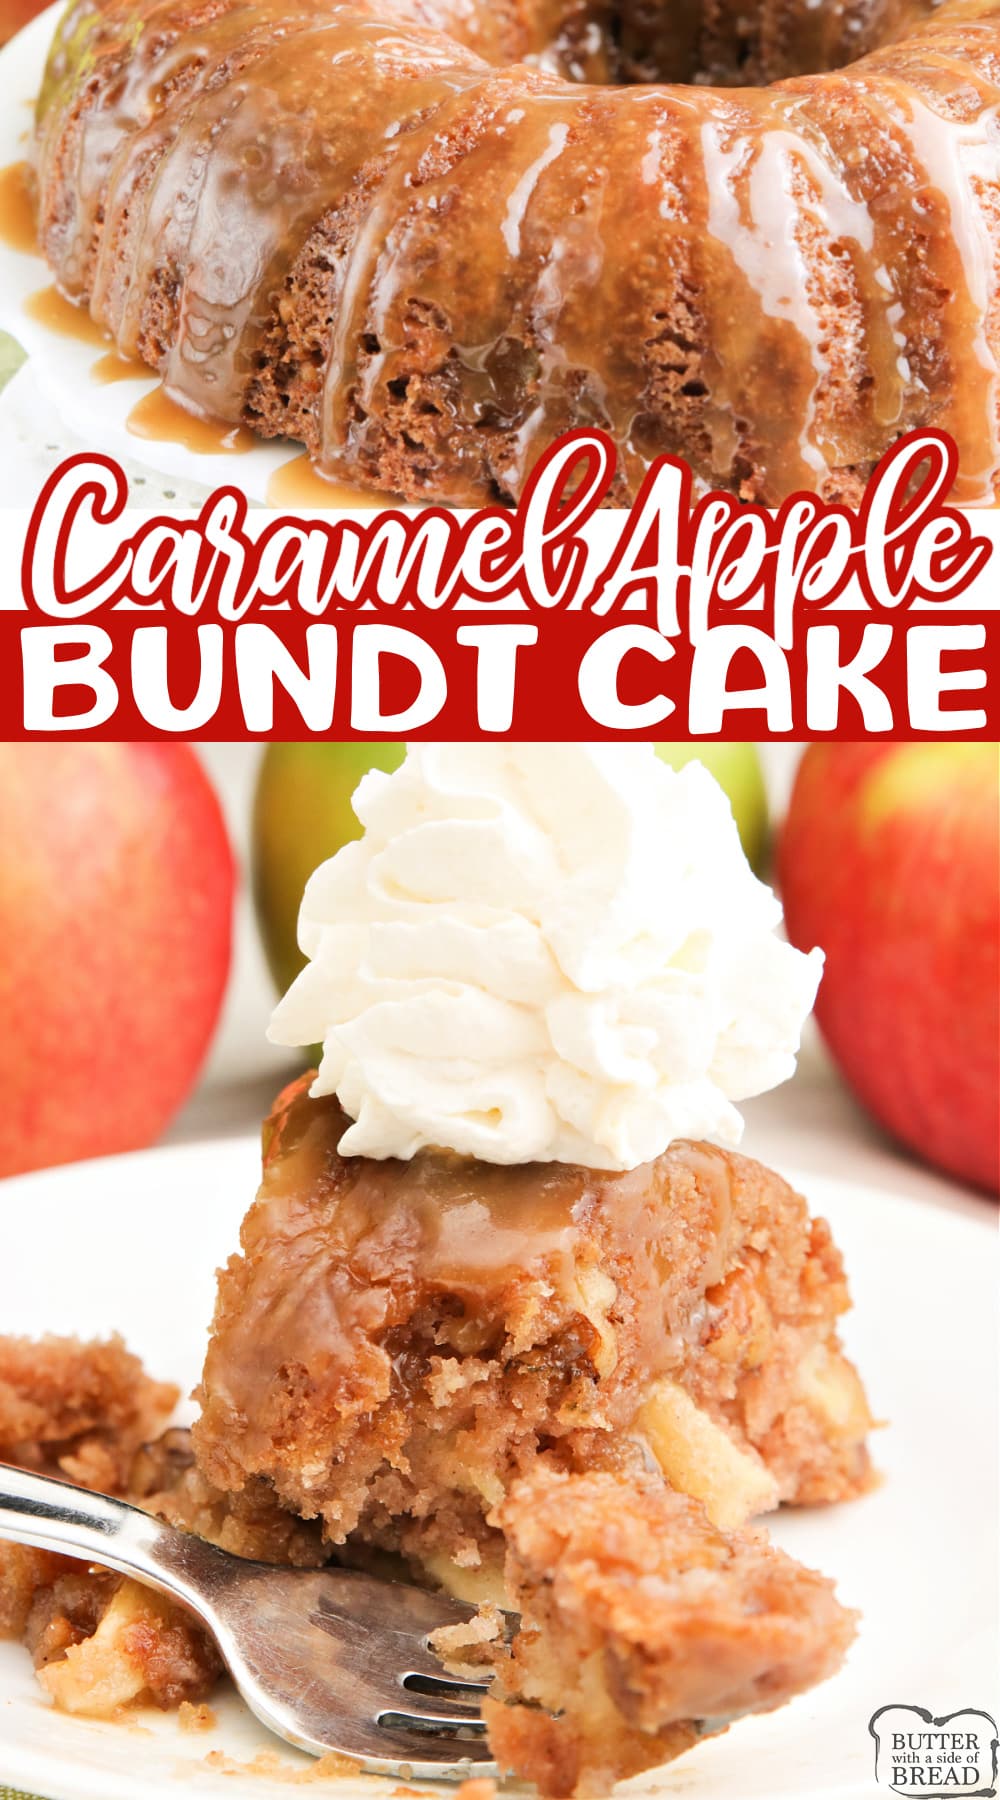 Caramel Apple Bundt Cake made from scratch with fresh apples and a simple caramel glaze. Delicious bundt cake recipe that is perfect for fall. 